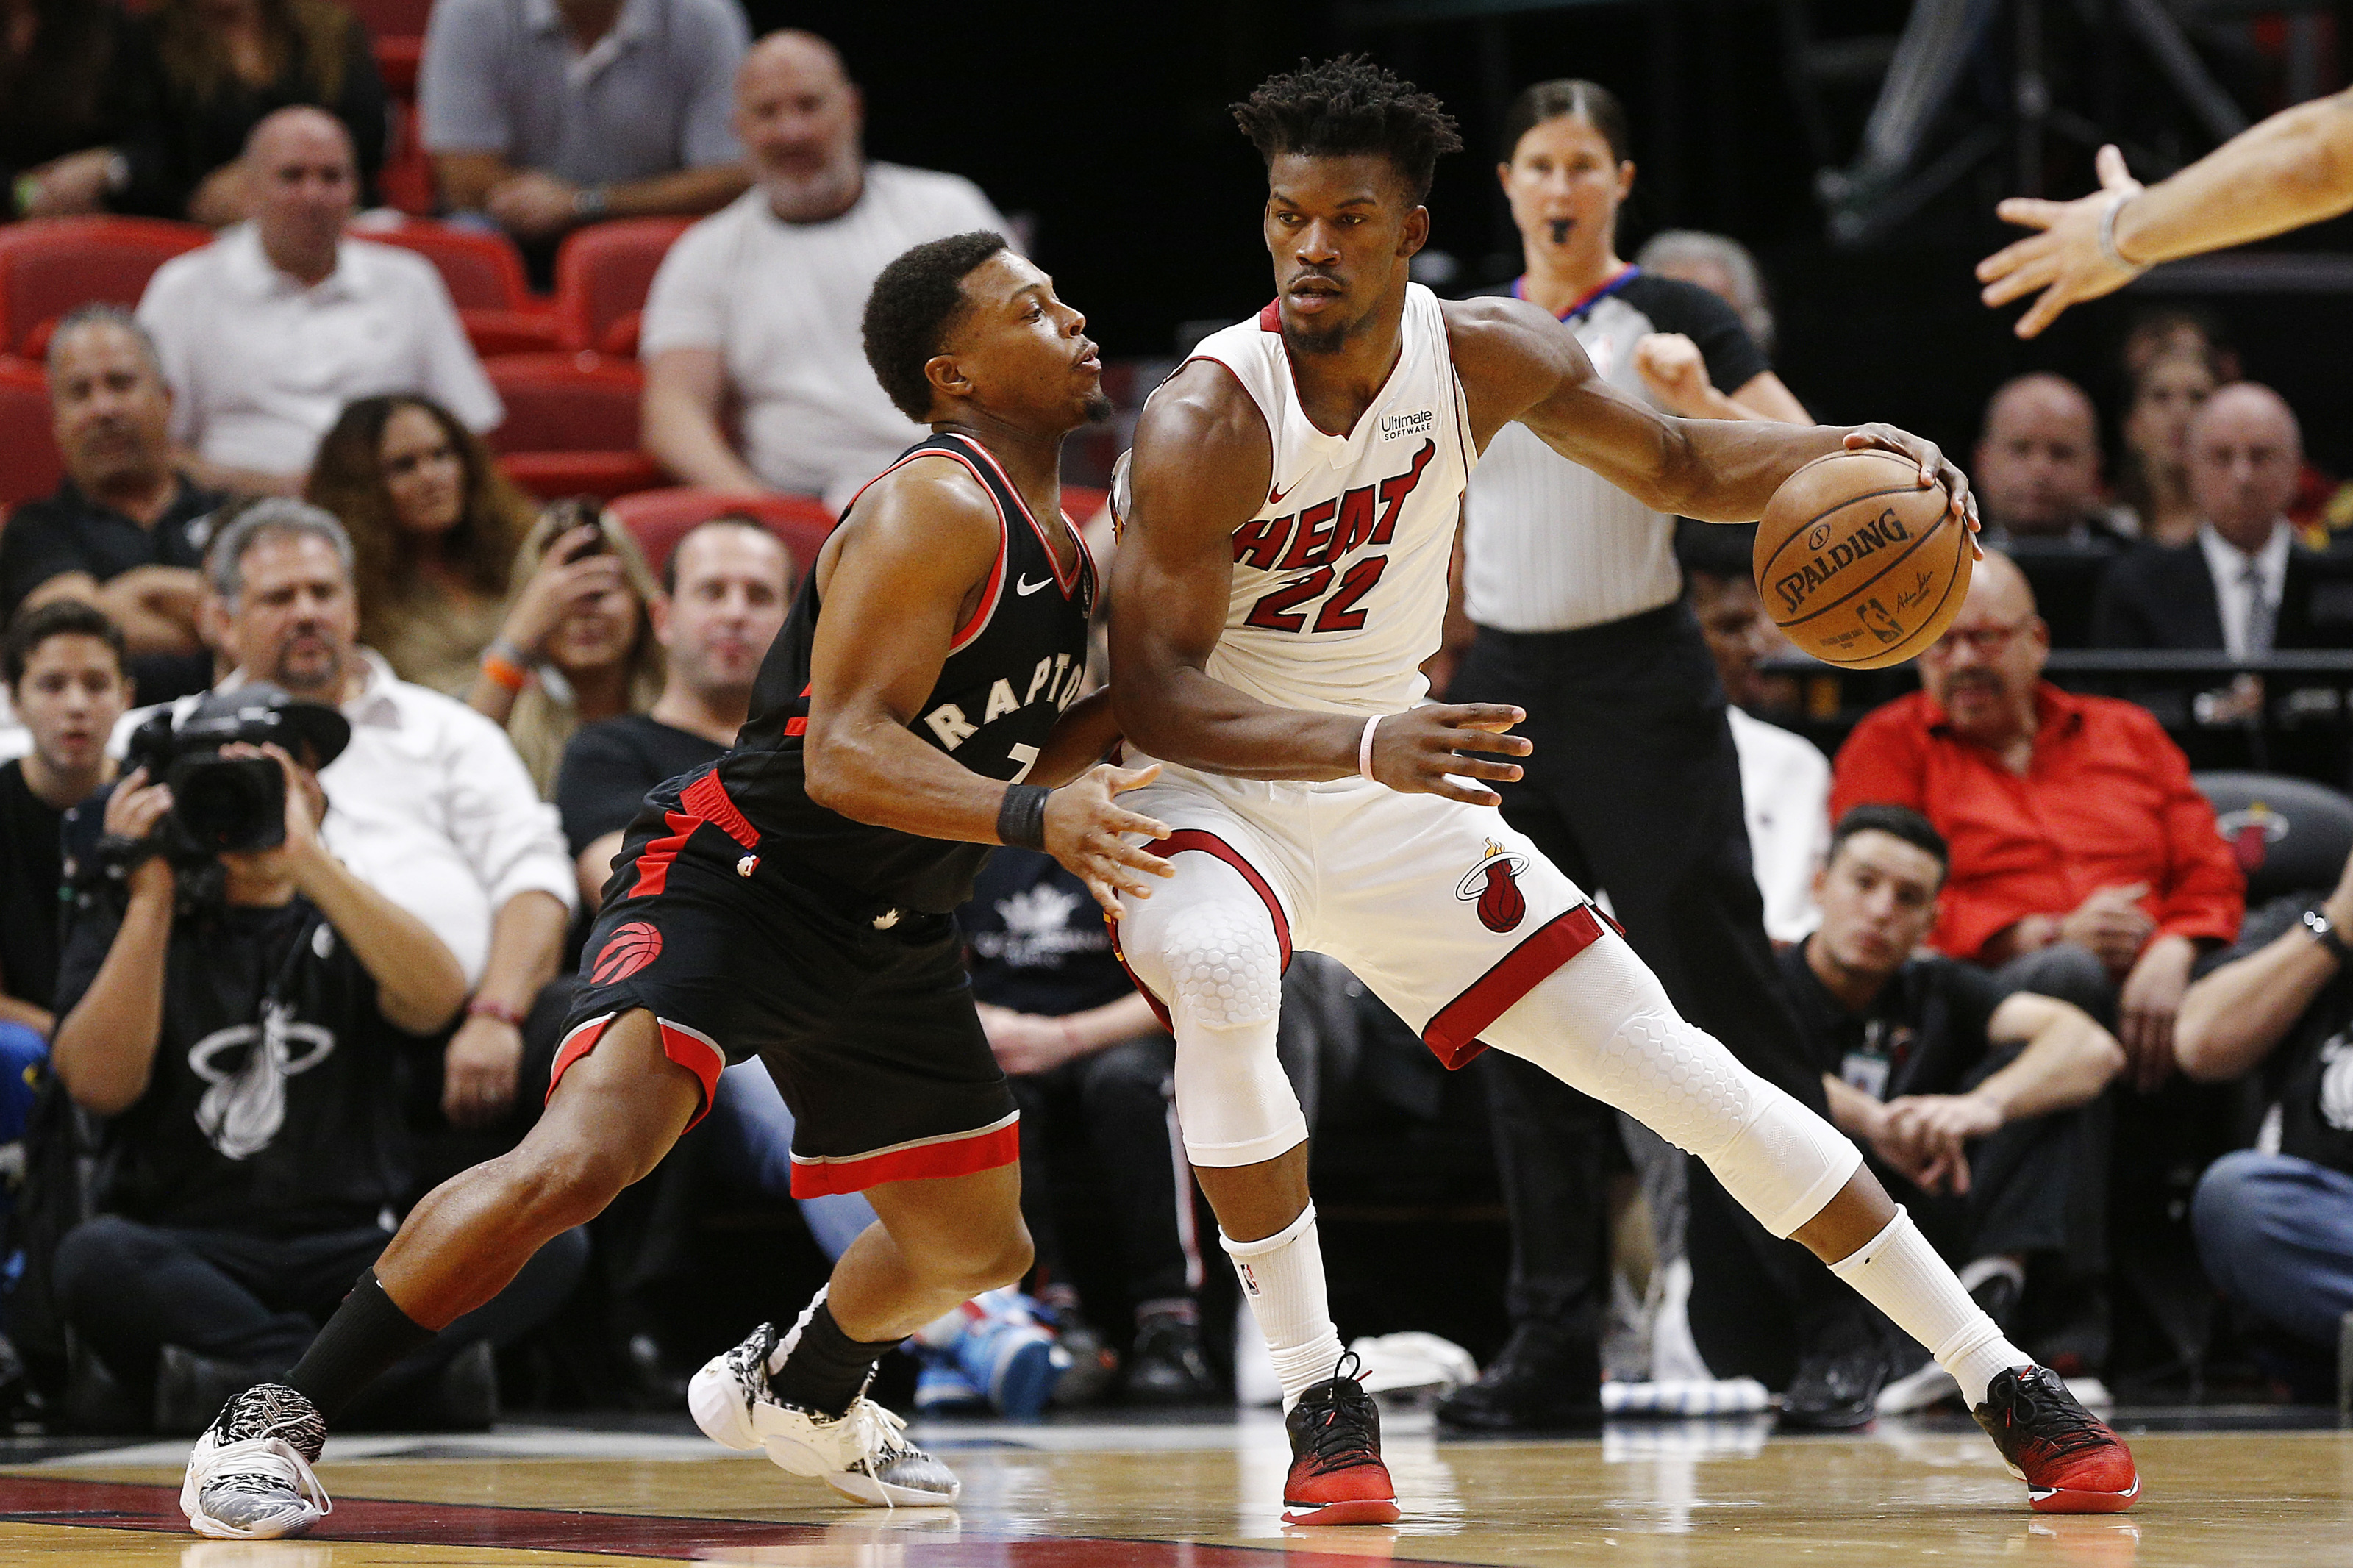 MIAMI, FLORIDA - JANUARY 02: Jimmy Butler #22 of the Miami Heat drives to the basket against Kyle Lowry #7 of the Toronto Raptors during the first half at American Airlines Arena on January 02, 2020 in Miami, Florida. NOTE TO USER: User expressly acknowledges and agrees that, by downloading and/or using this photograph, user is consenting to the terms and conditions of the Getty Images License Agreement. (Photo by Michael Reaves/Getty Images)